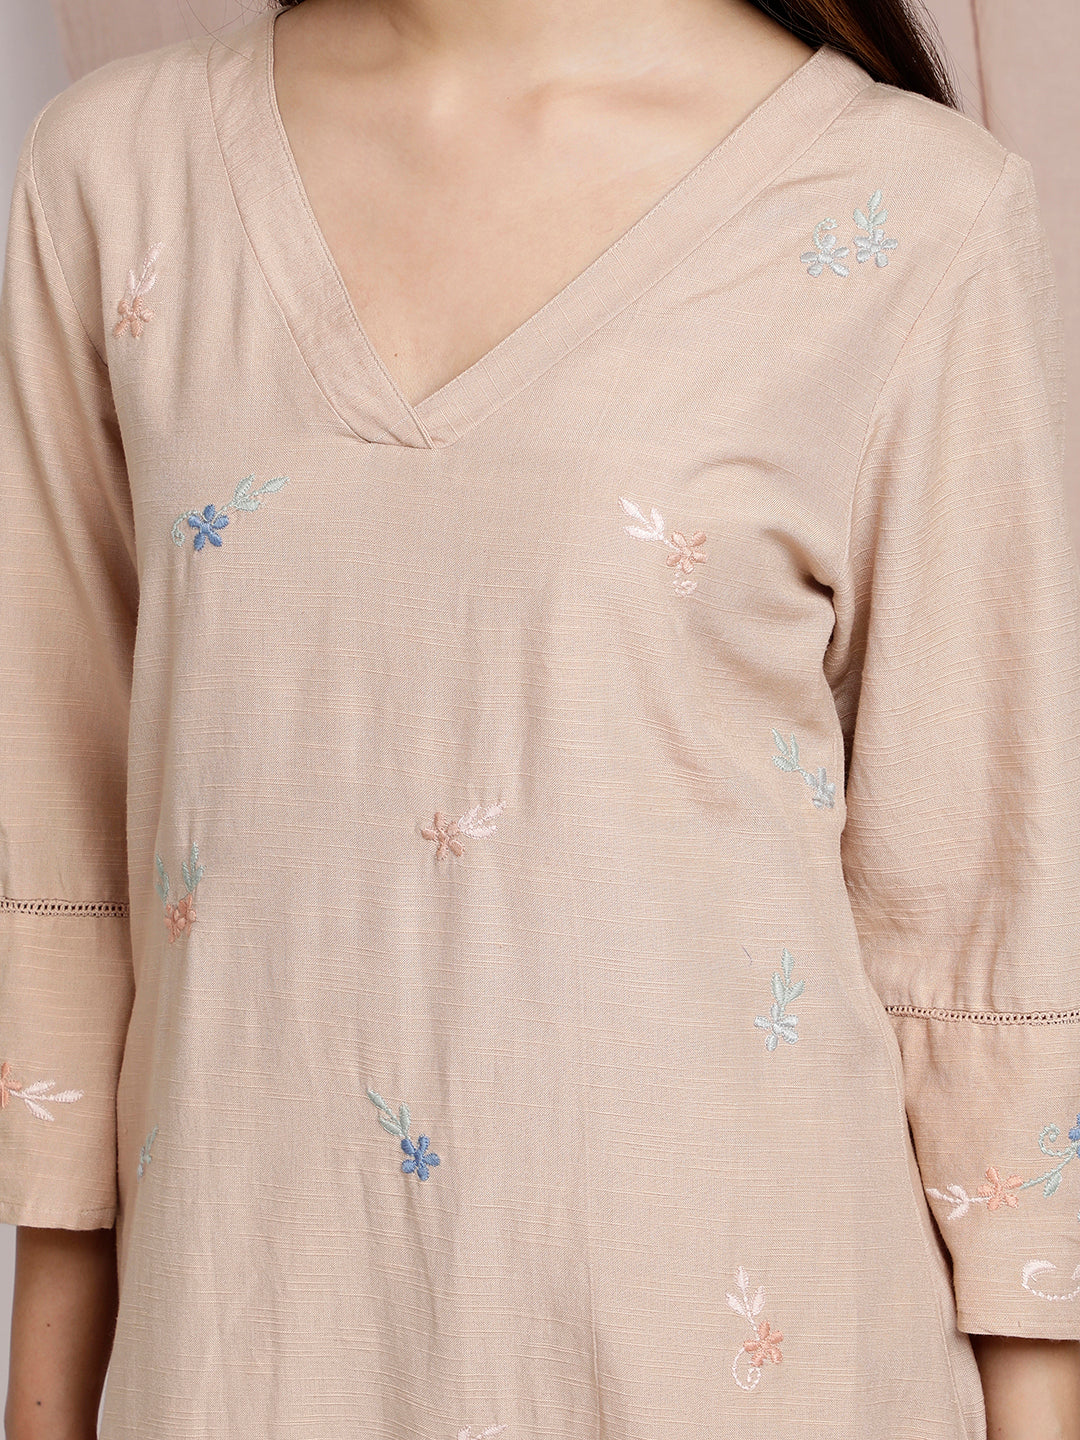 BEIGE EMBROIDERED LINEN KURTA WITH PANTS